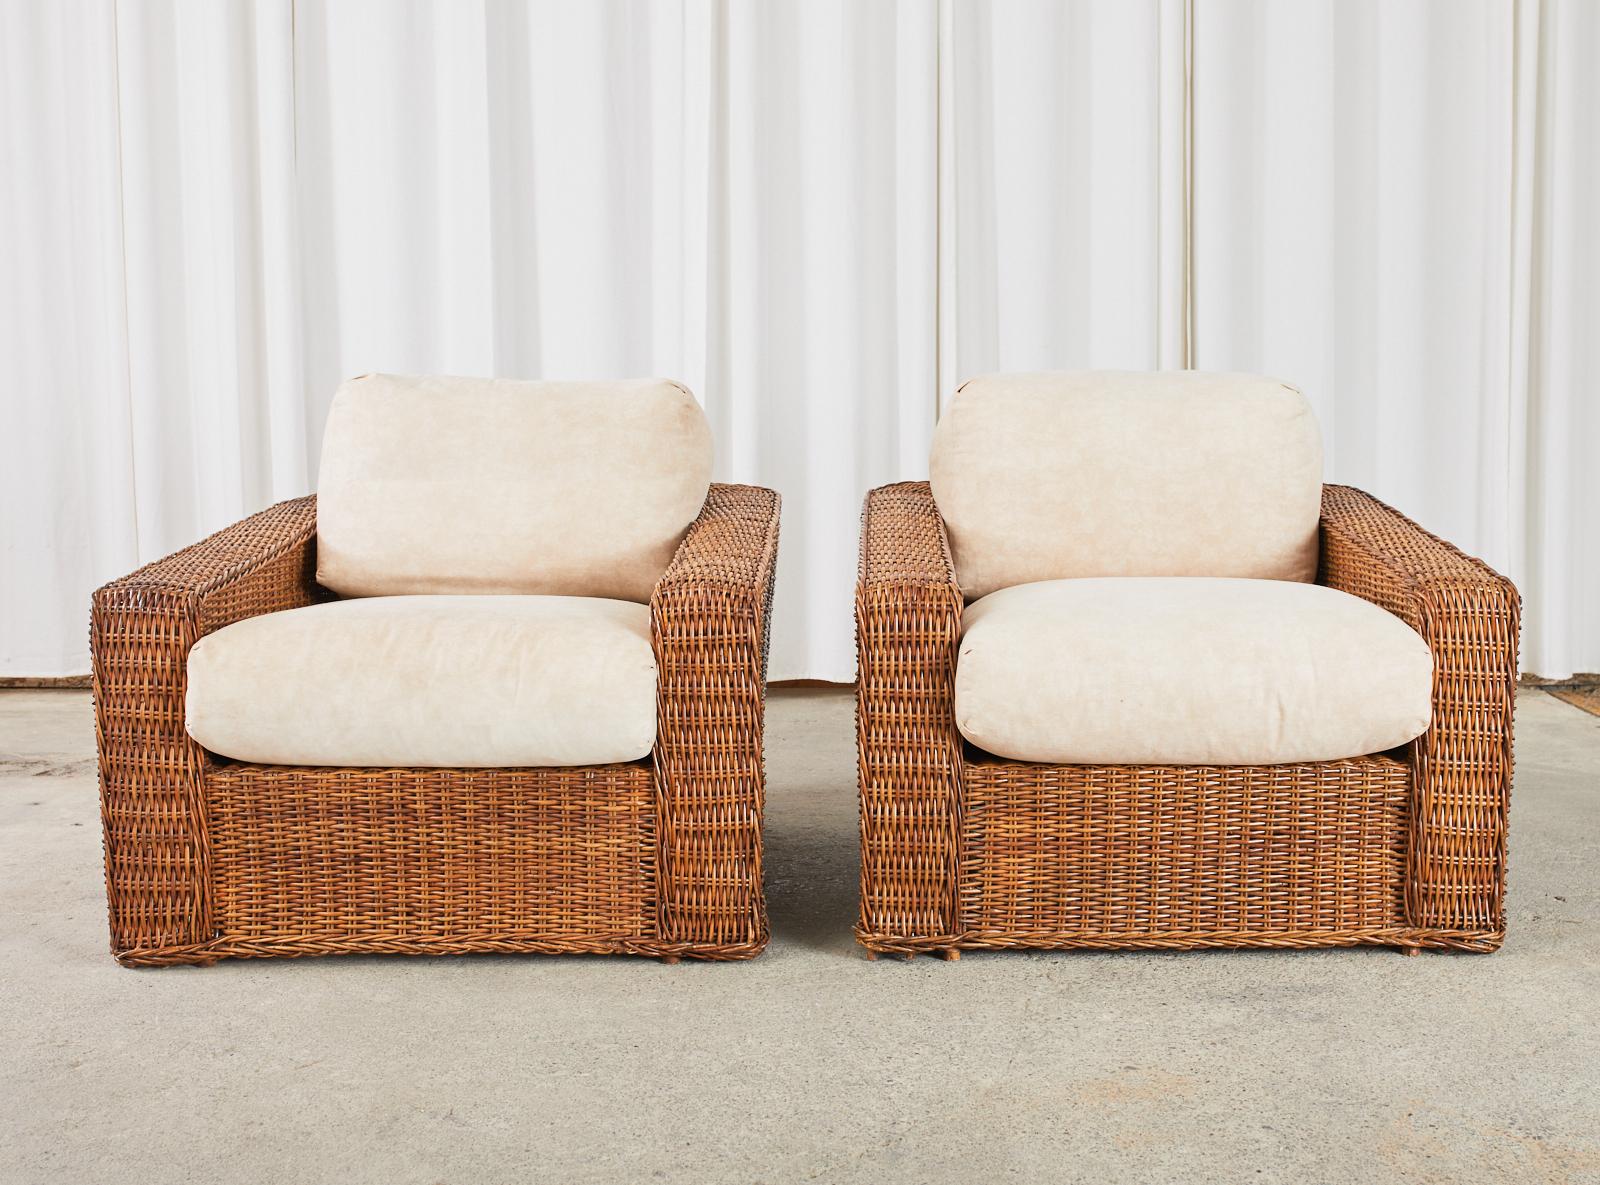 Grand pair of oversized woven rattan wicker cube shaped lounge chairs or club chairs made in the fabulous organic modern manner and style of Michael Taylor. The chairs feature a large bamboo and wood frame covered with woven rattan wicker with